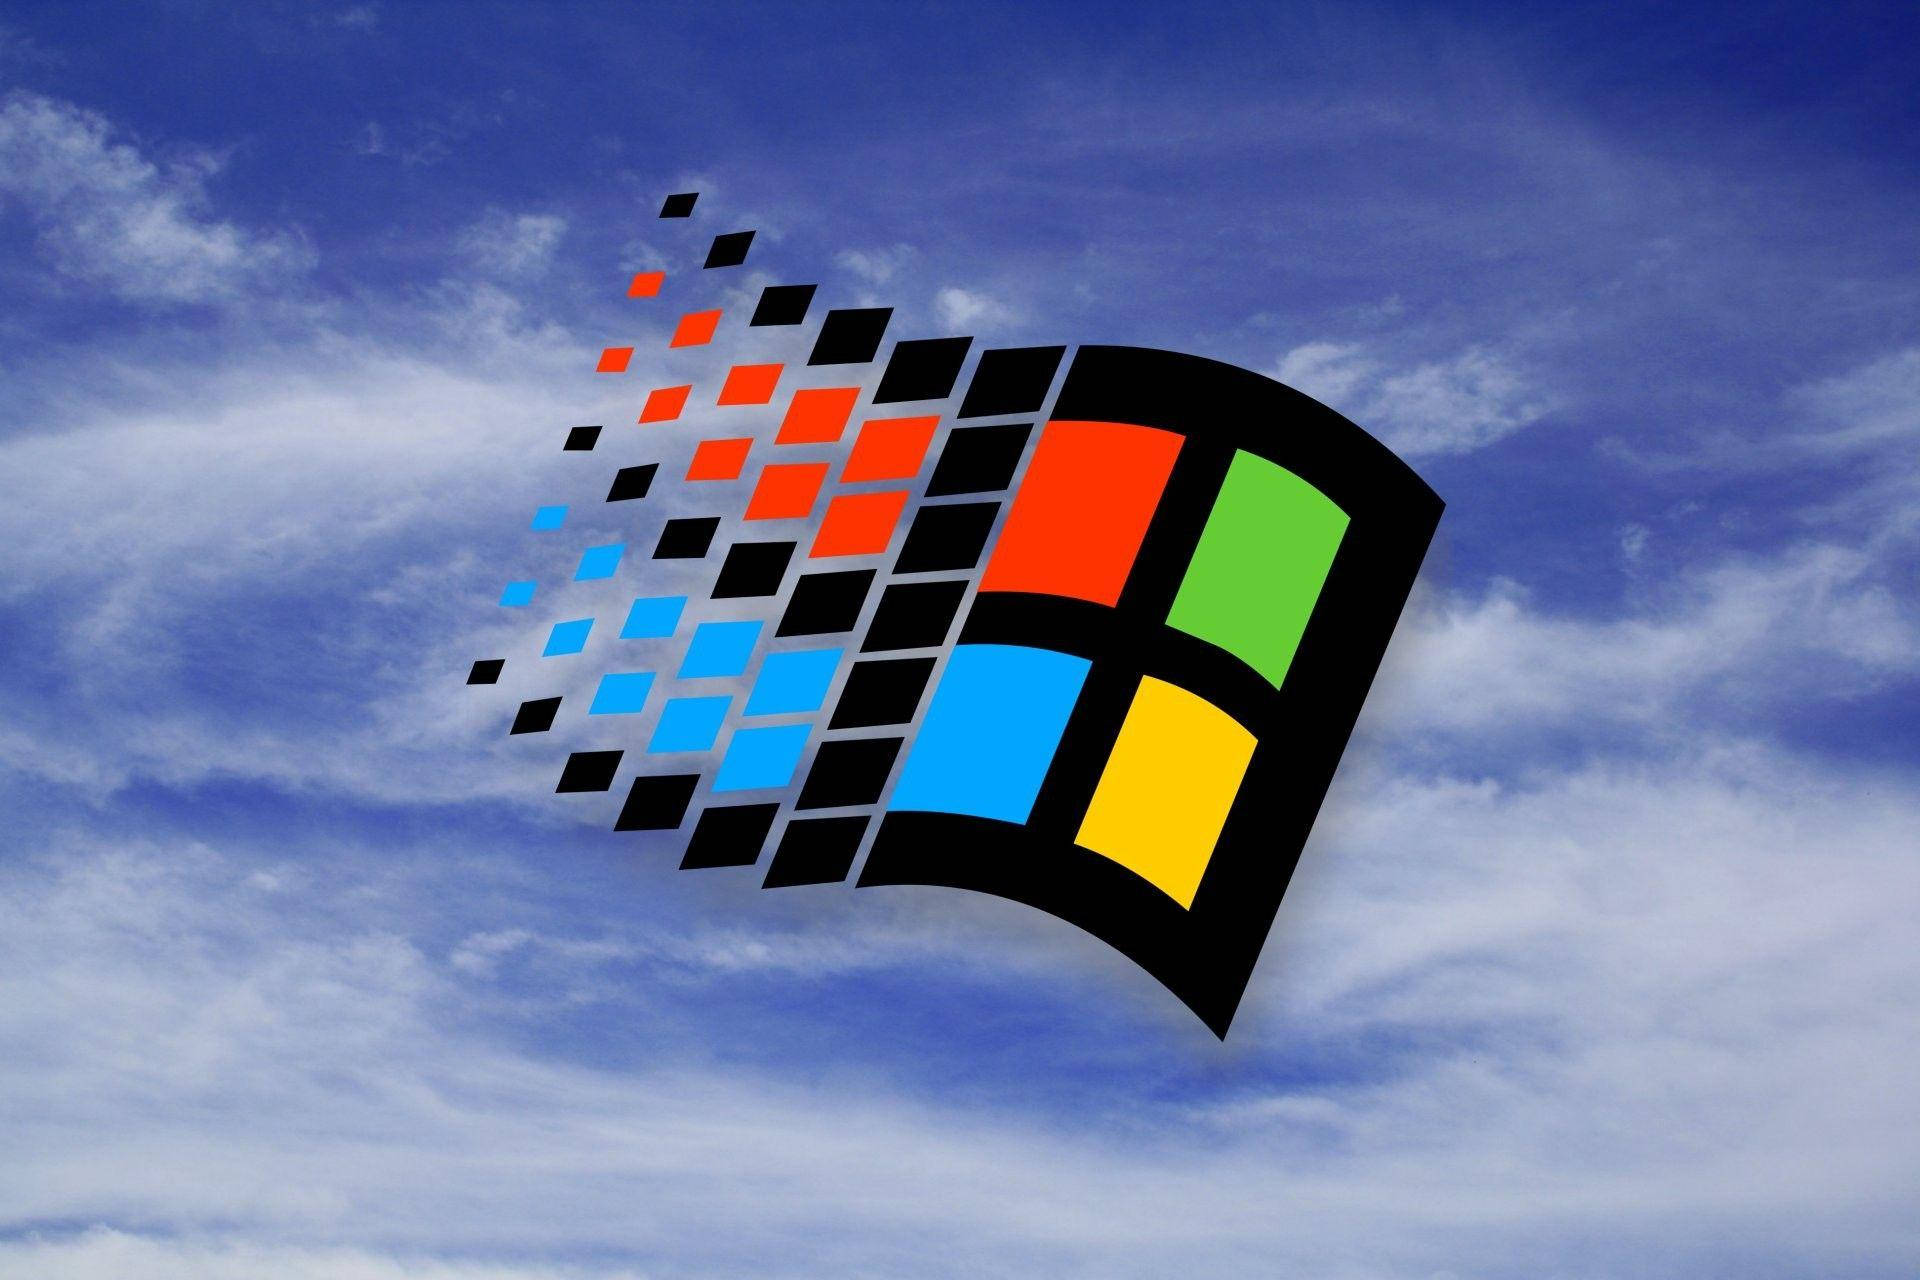 The classic operating system - Windows 98 Wallpaper